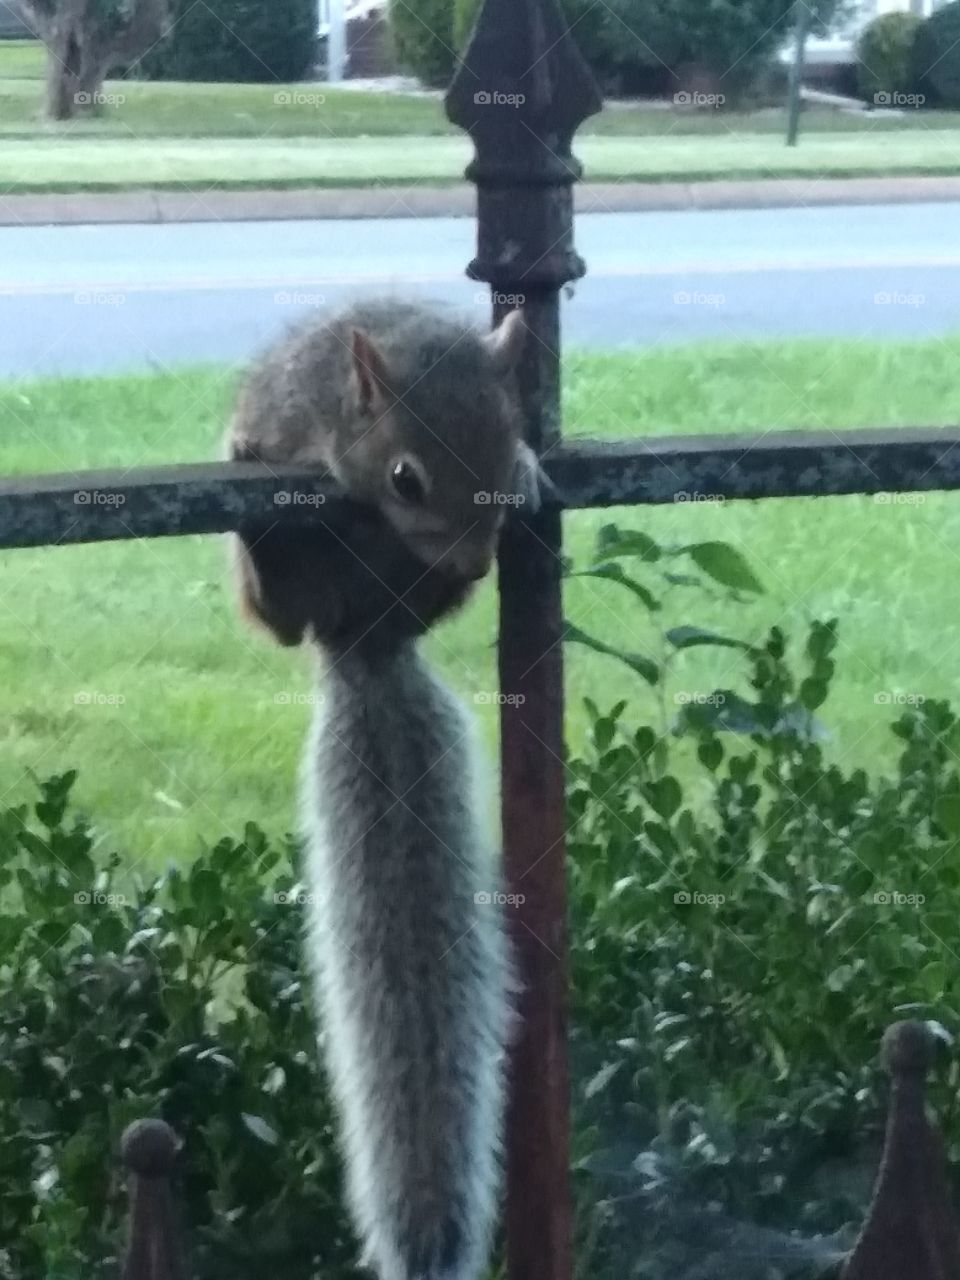 Lil baby squirrel hangin on a fence scared to death of the cat next door.